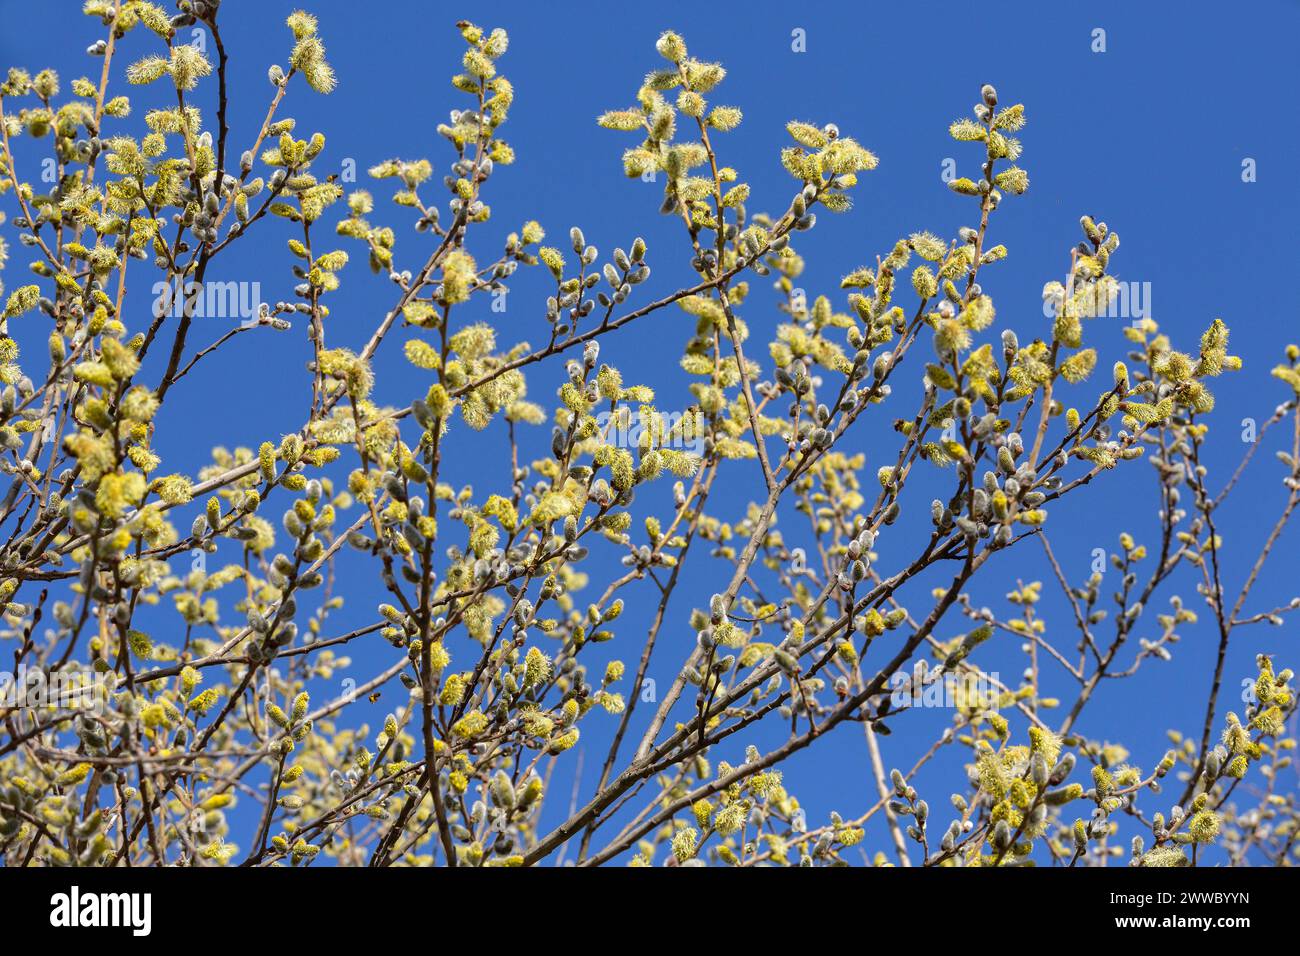 Willow Catkins In Bloom Stock Photo